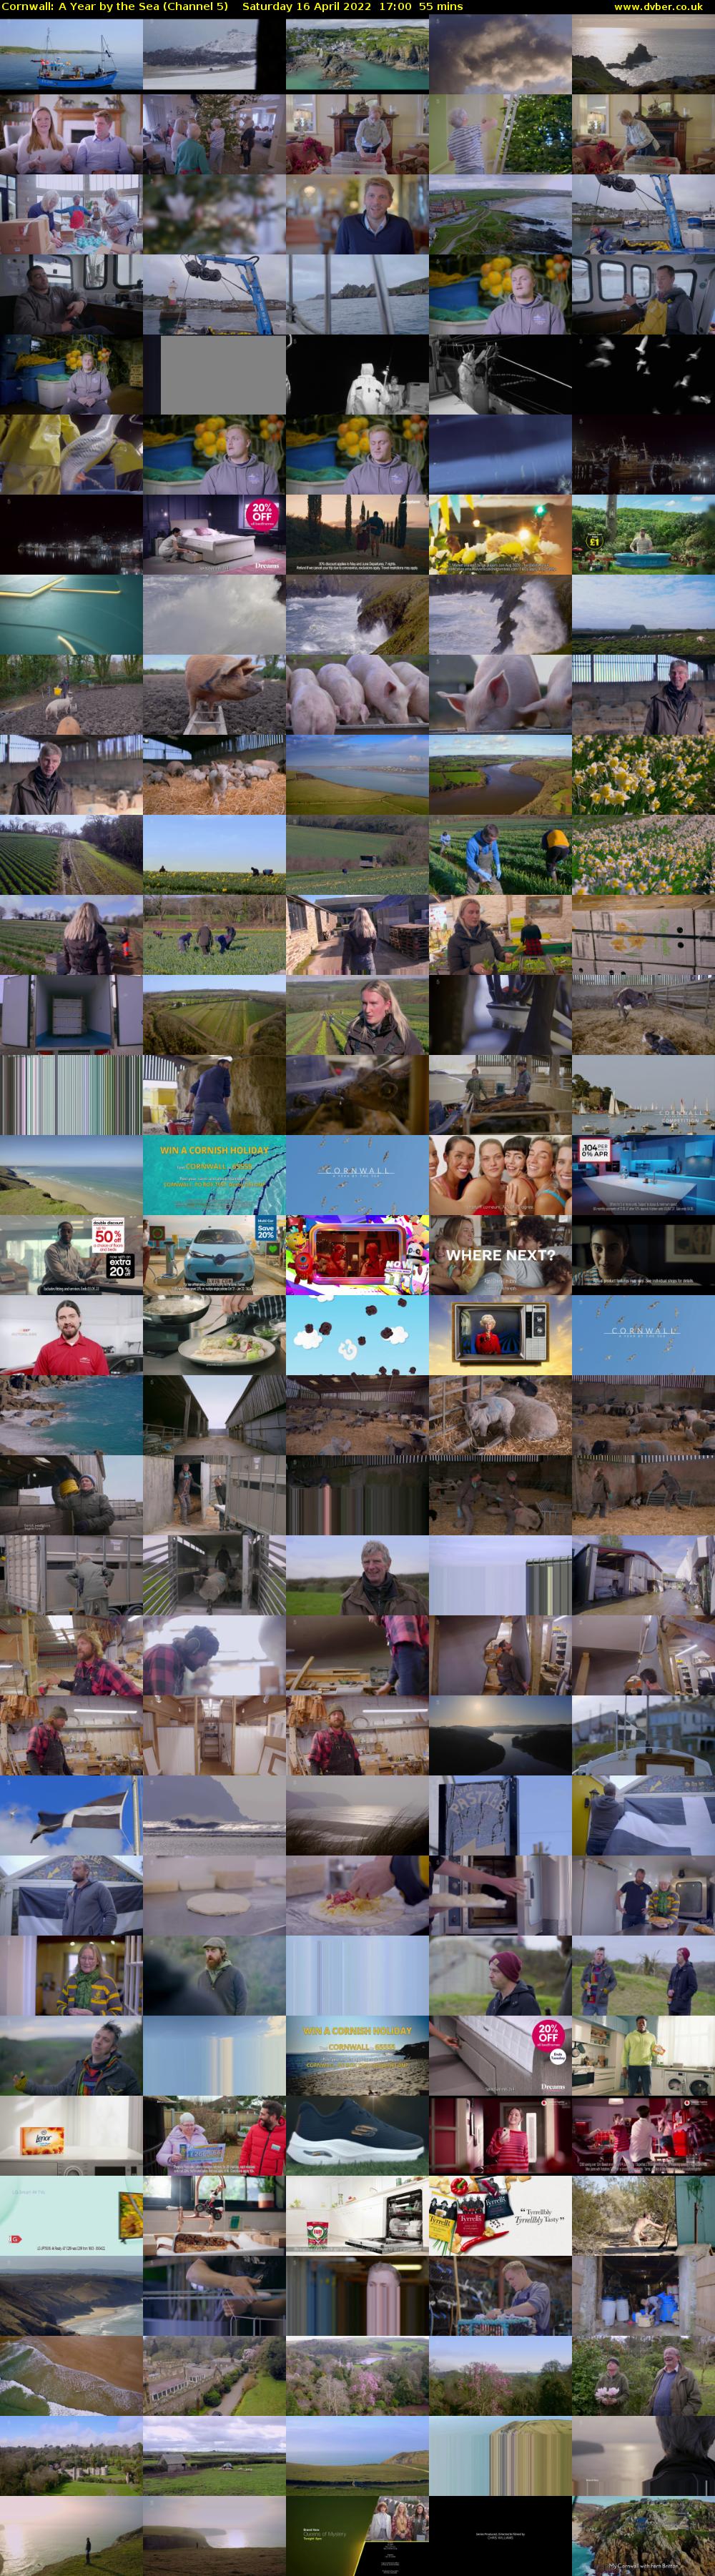 Cornwall: A Year by the Sea (Channel 5) Saturday 16 April 2022 17:00 - 17:55